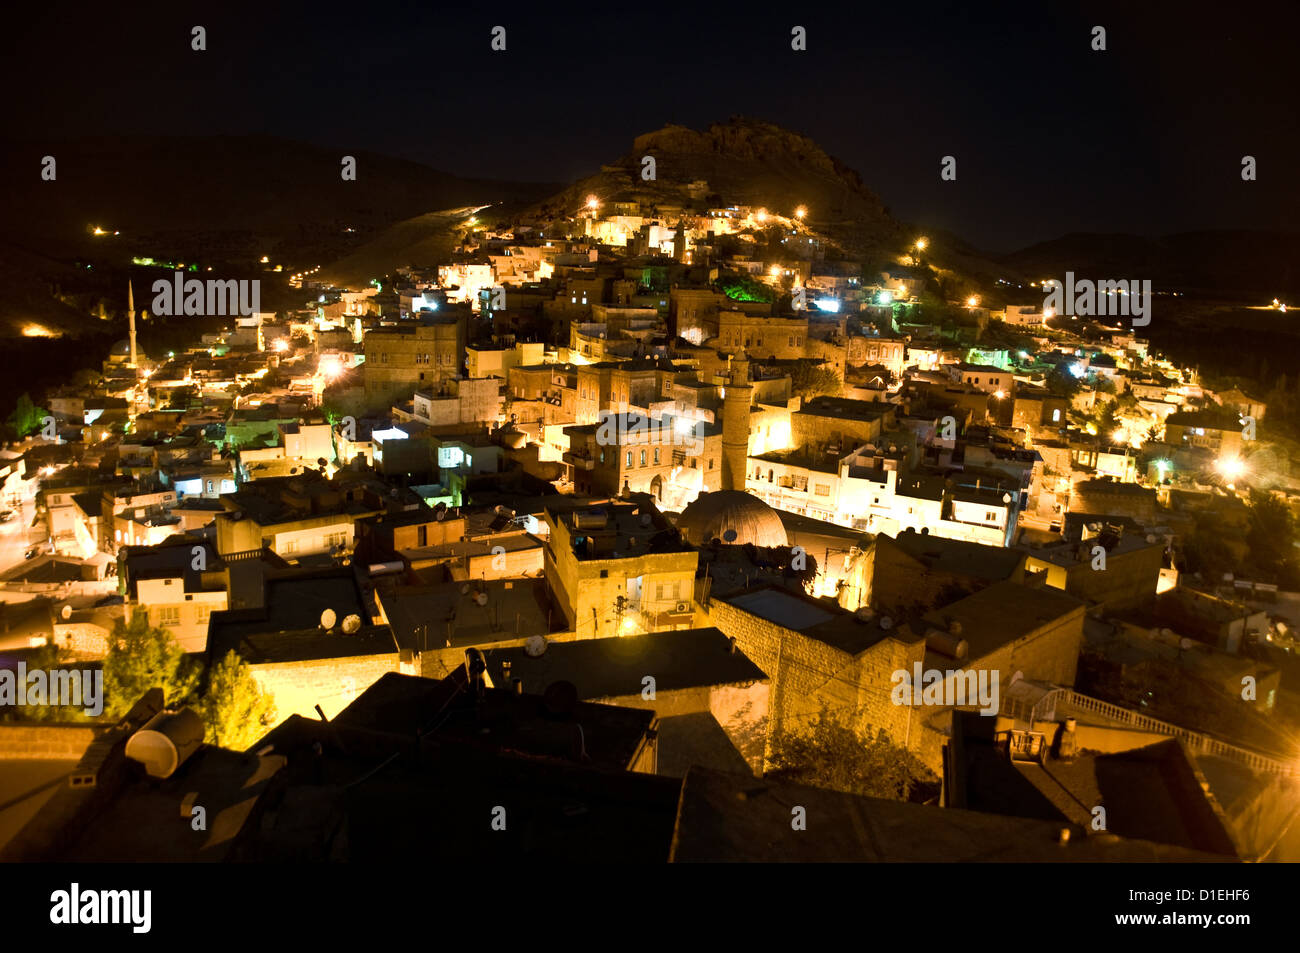 A scenic night view of the ancient Arab and Kurdish town of Savur, in Mardin province, in the eastern Anatolia region of southeastern Turkey. Stock Photo